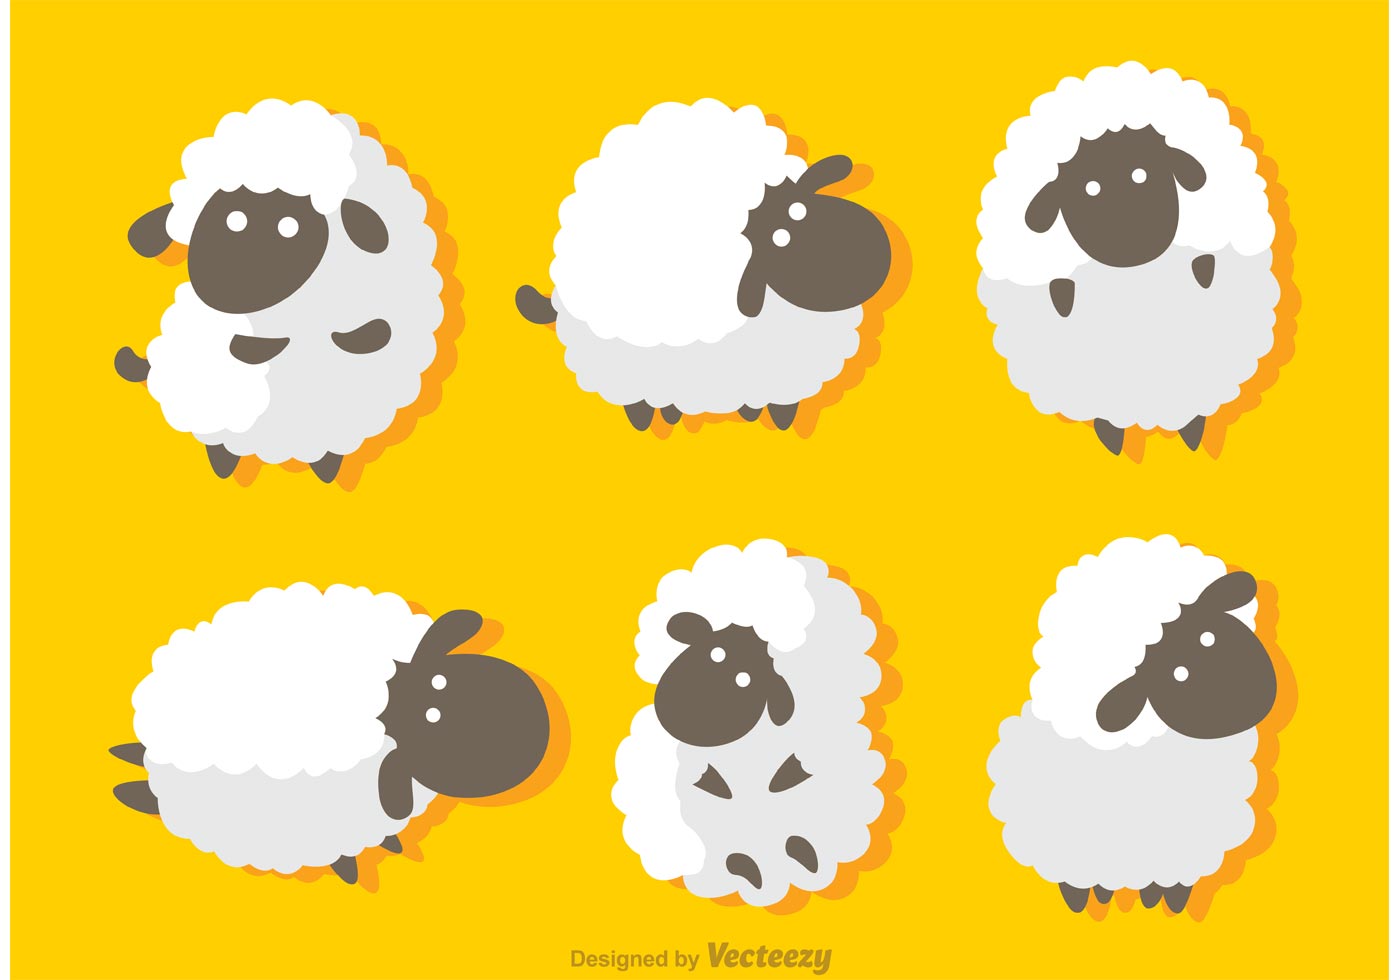 Download Funny Sheep Vector - Download Free Vector Art, Stock Graphics & Images